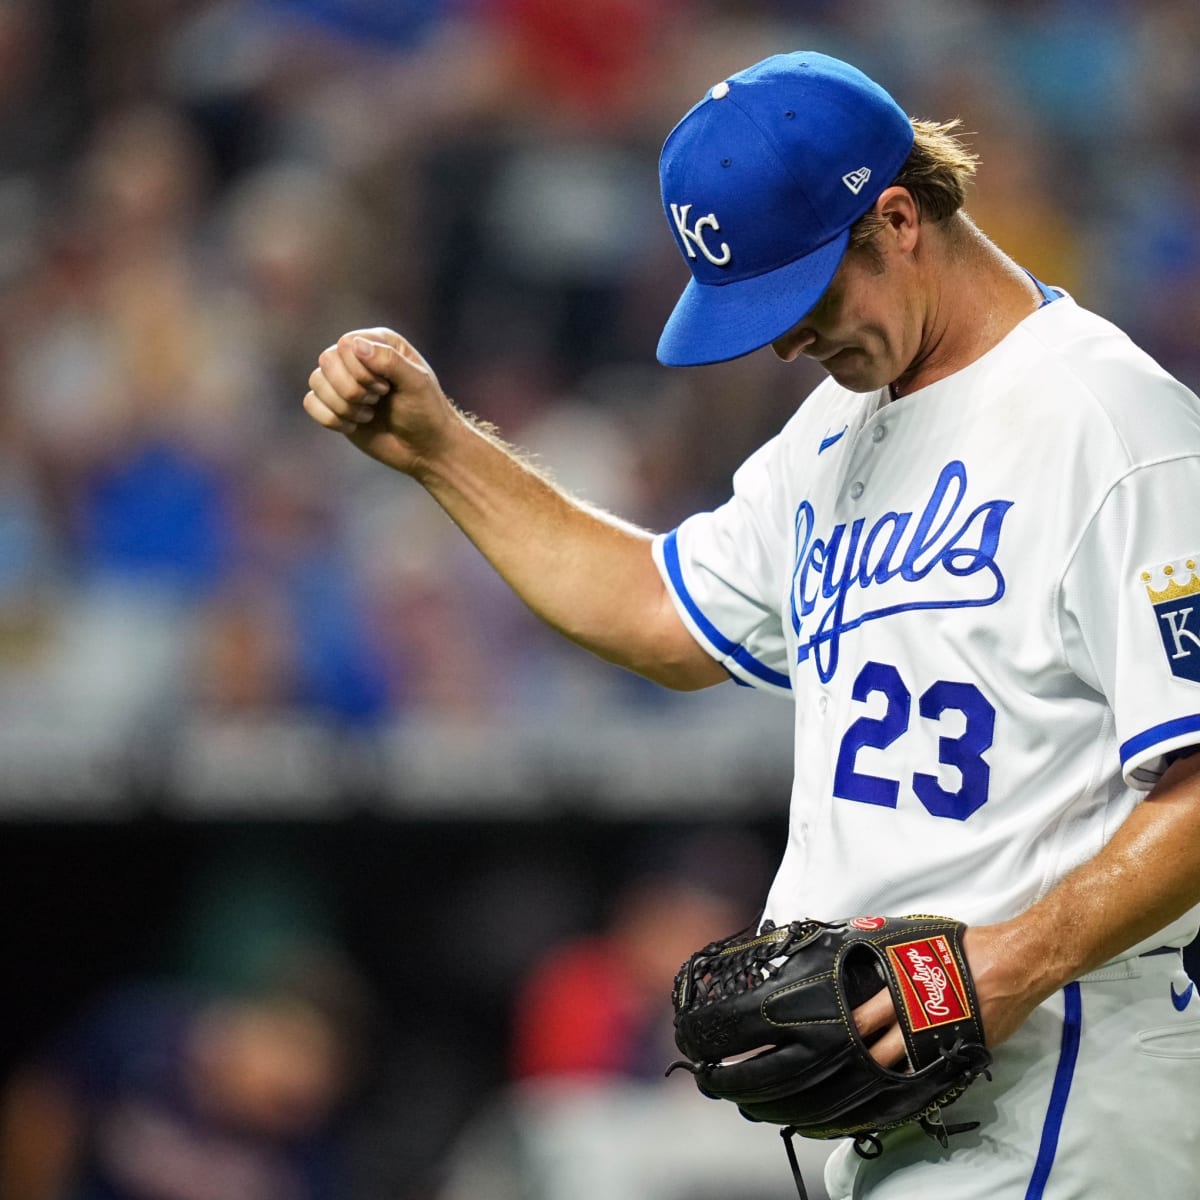 Quick-thinking Zack Greinke helped Royals get an out in manner